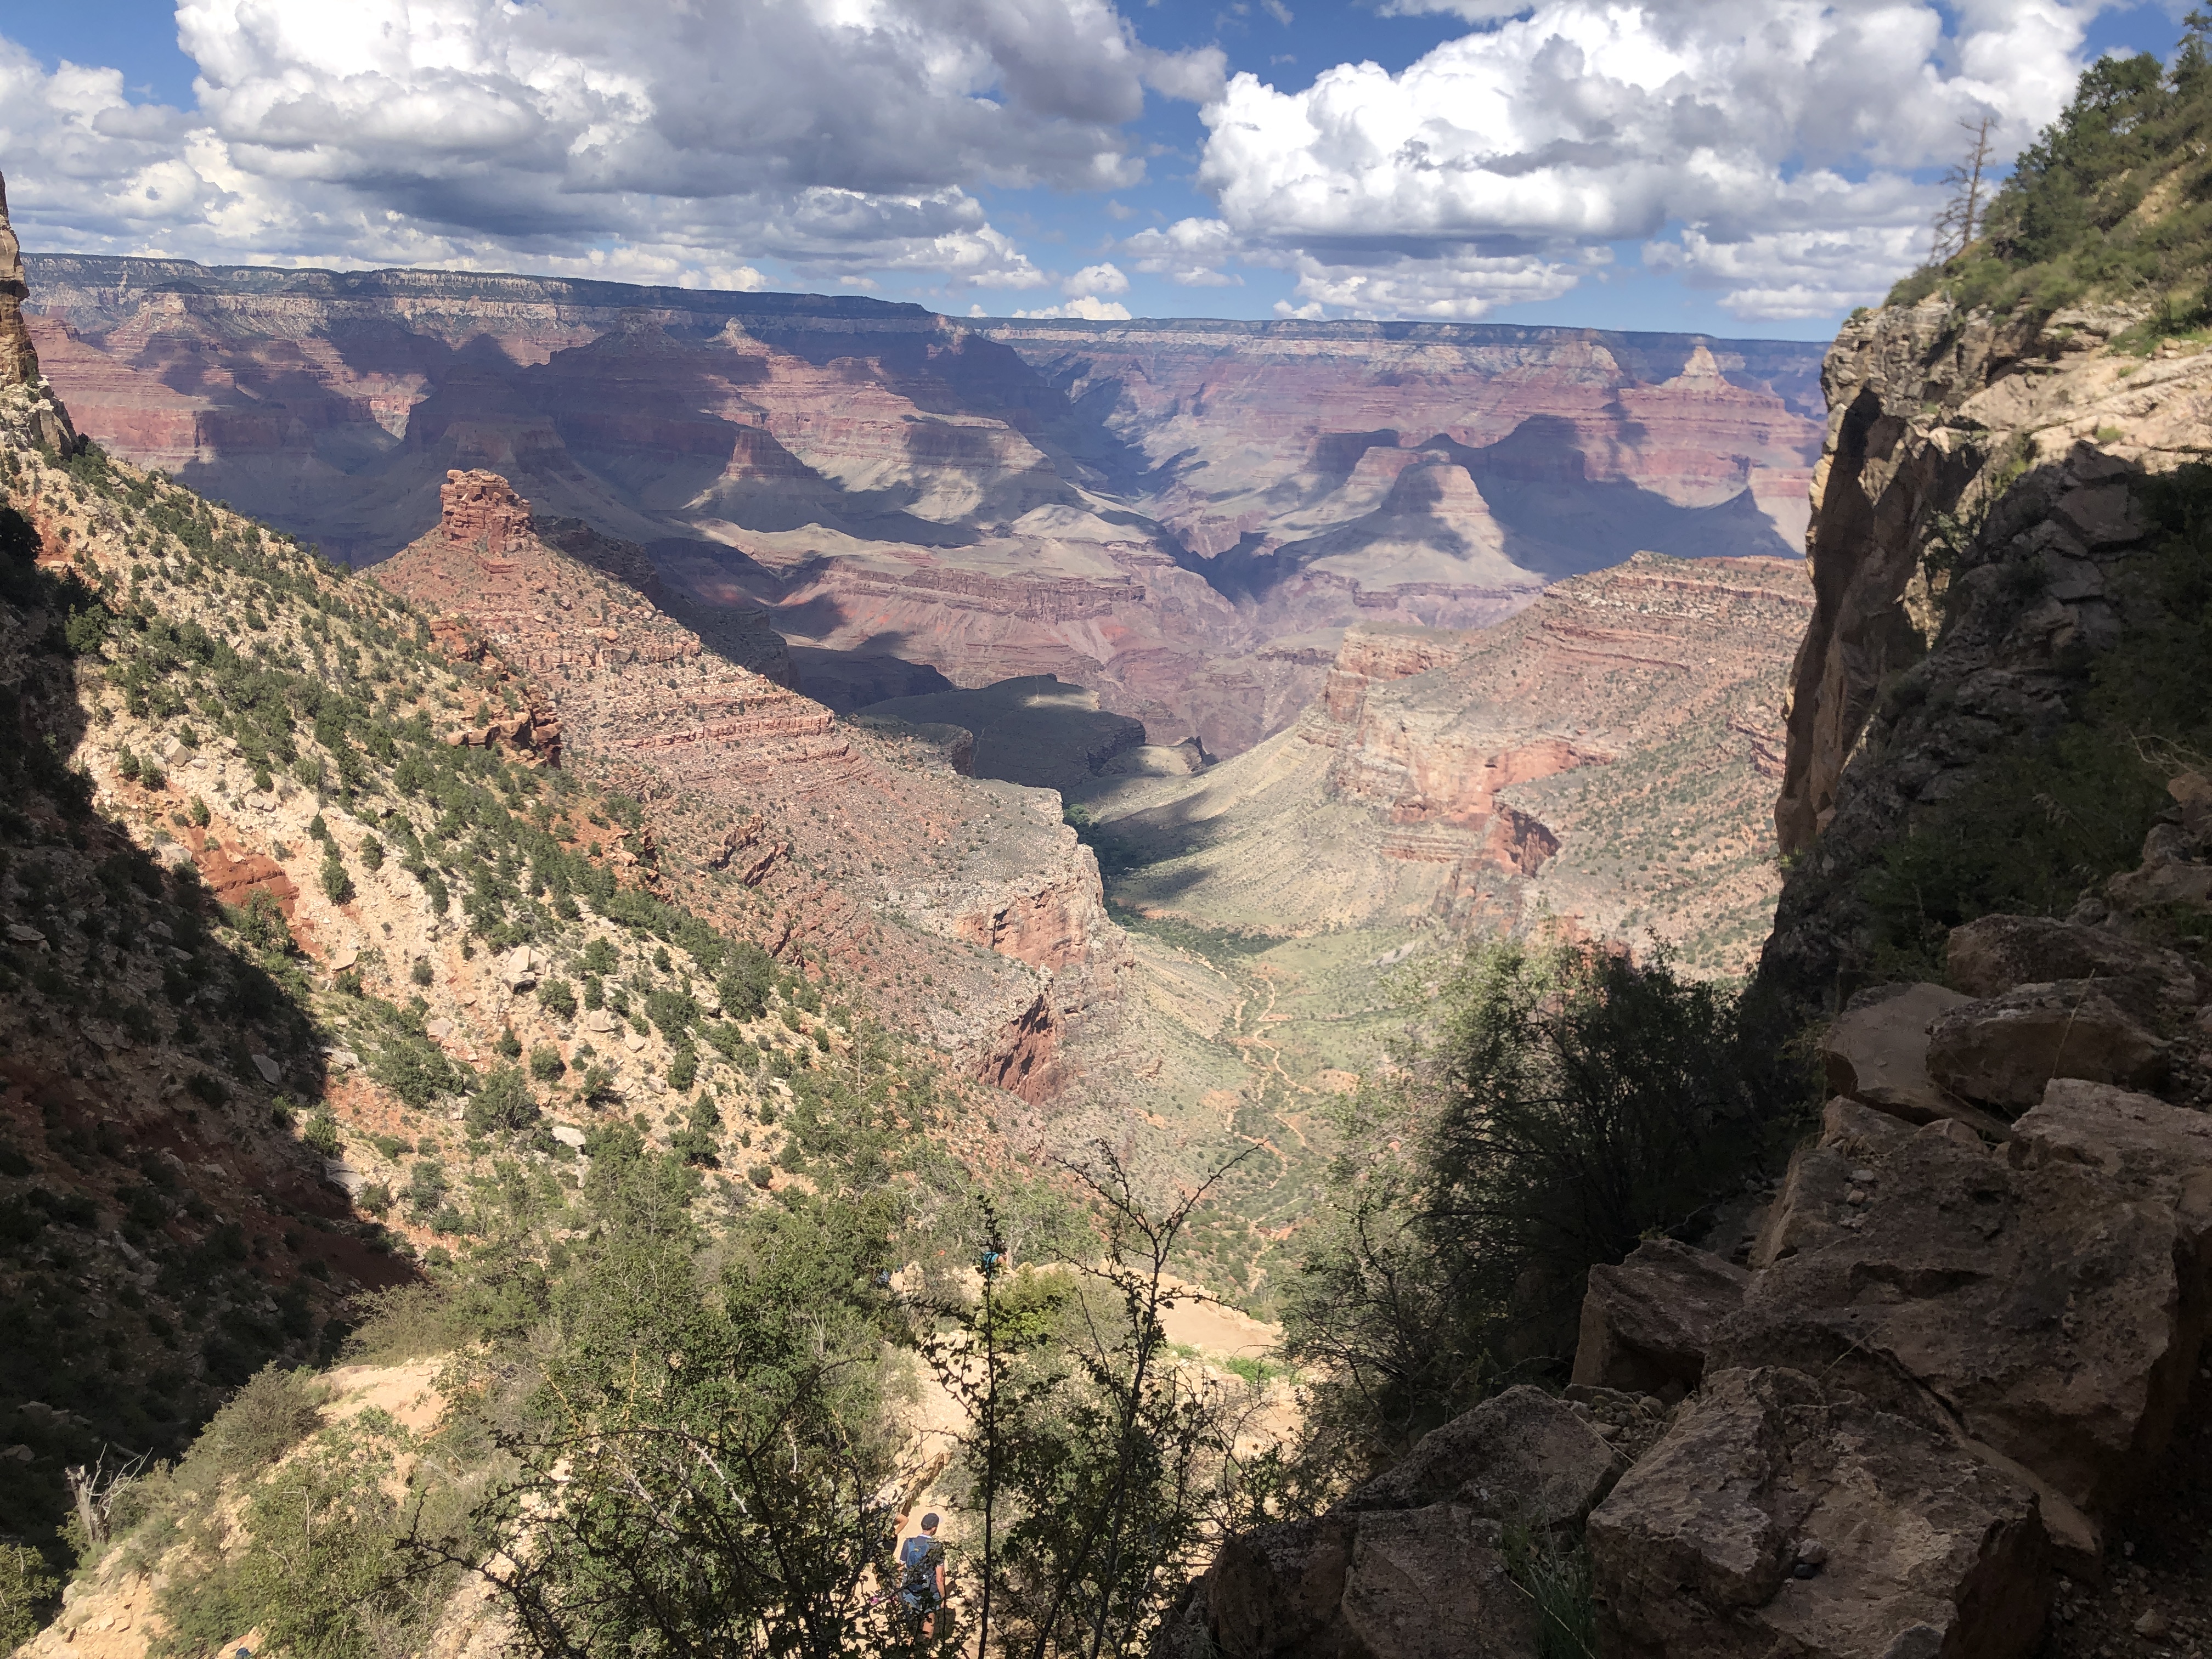 The Grand Canyon, taken from the rim looking down